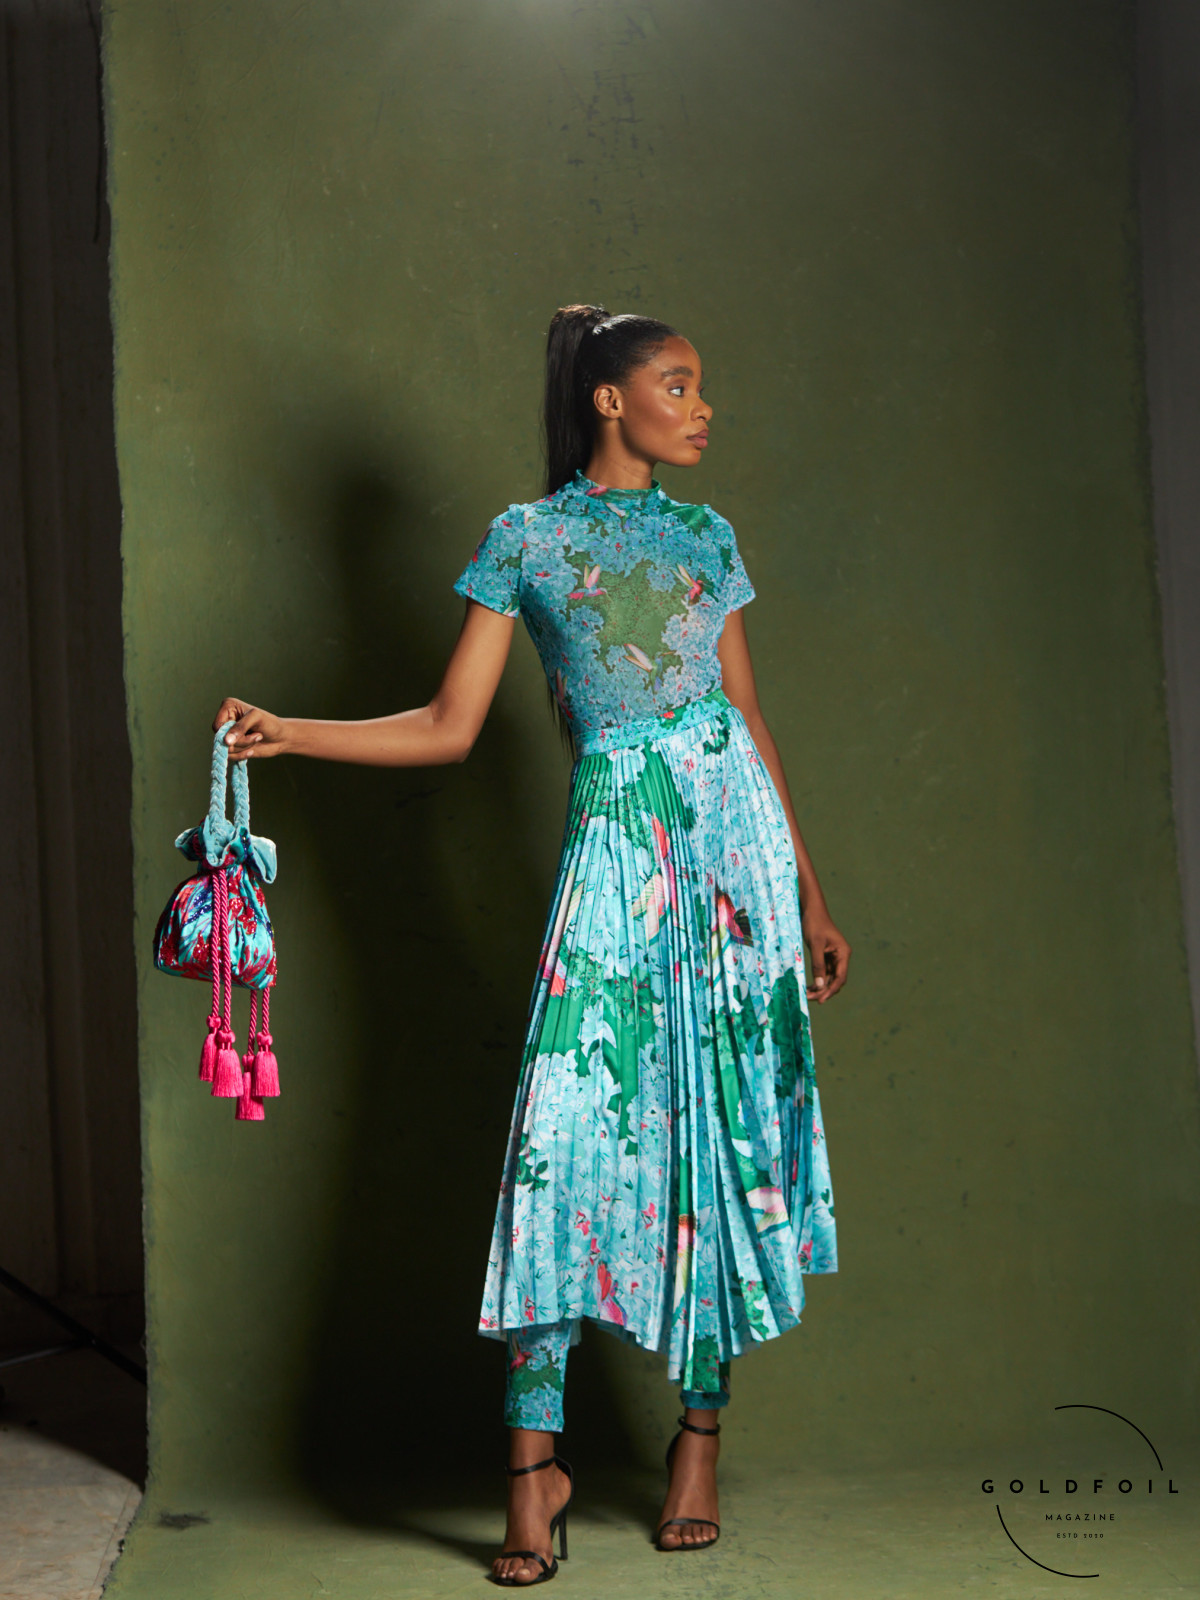 Banke Kuku showcases a colourful collection, in this photo we can see a long dress with a pleated bottom half in a stunning vibrant marine blue